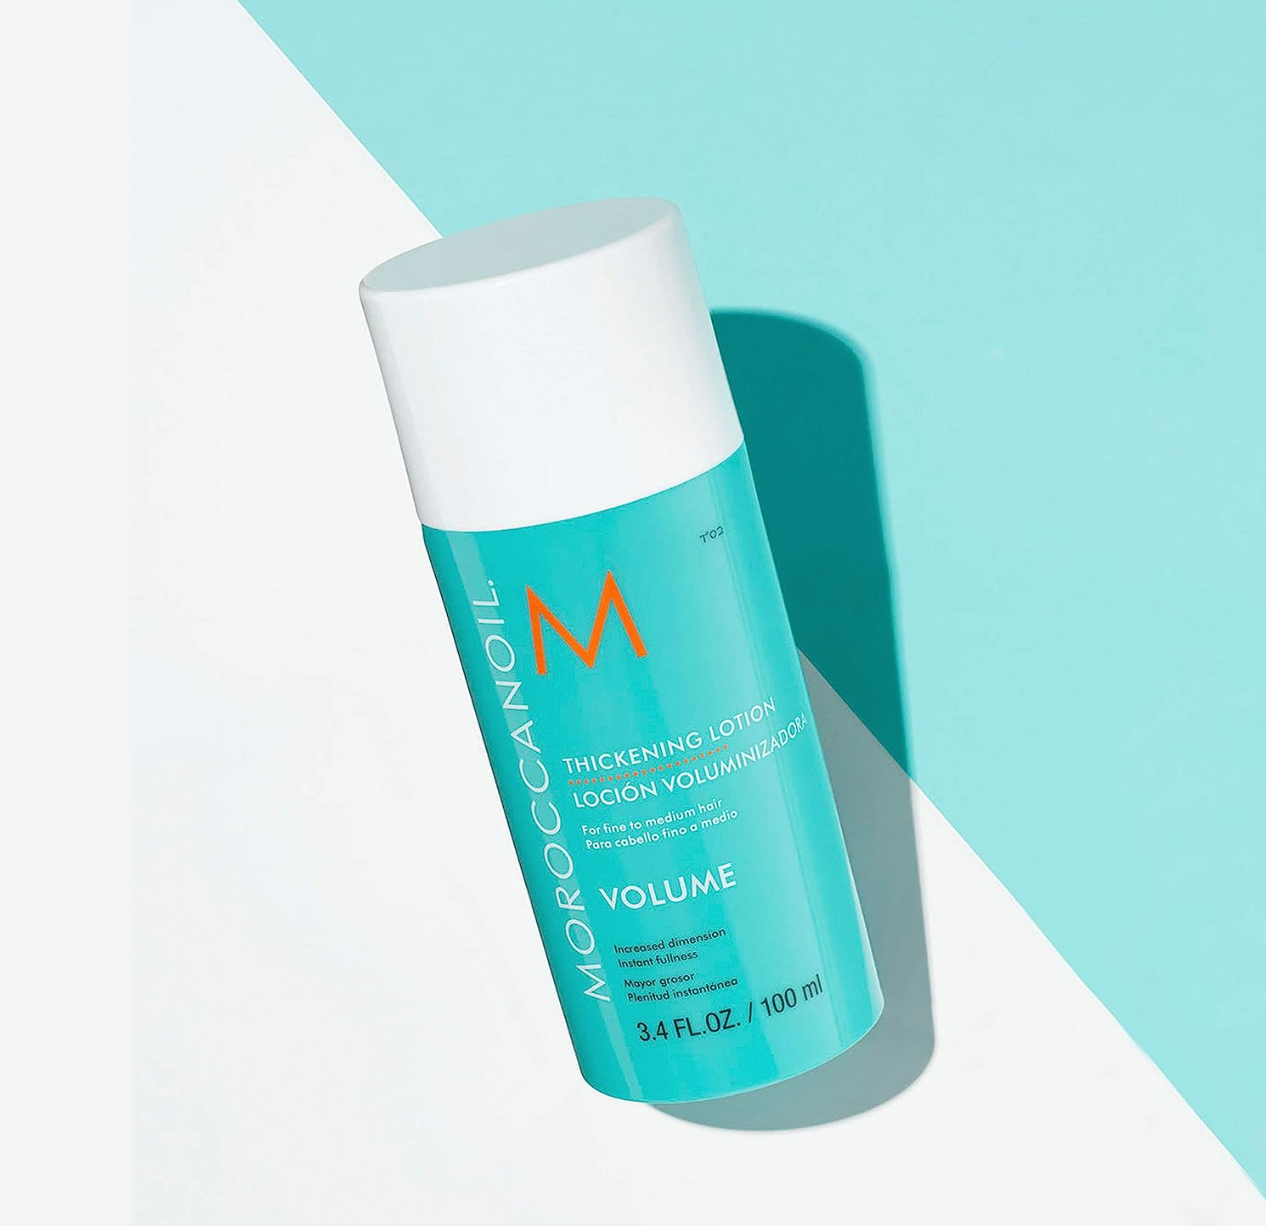 Moroccanoil Thickening Lotion, 3.4 Fl. Oz.